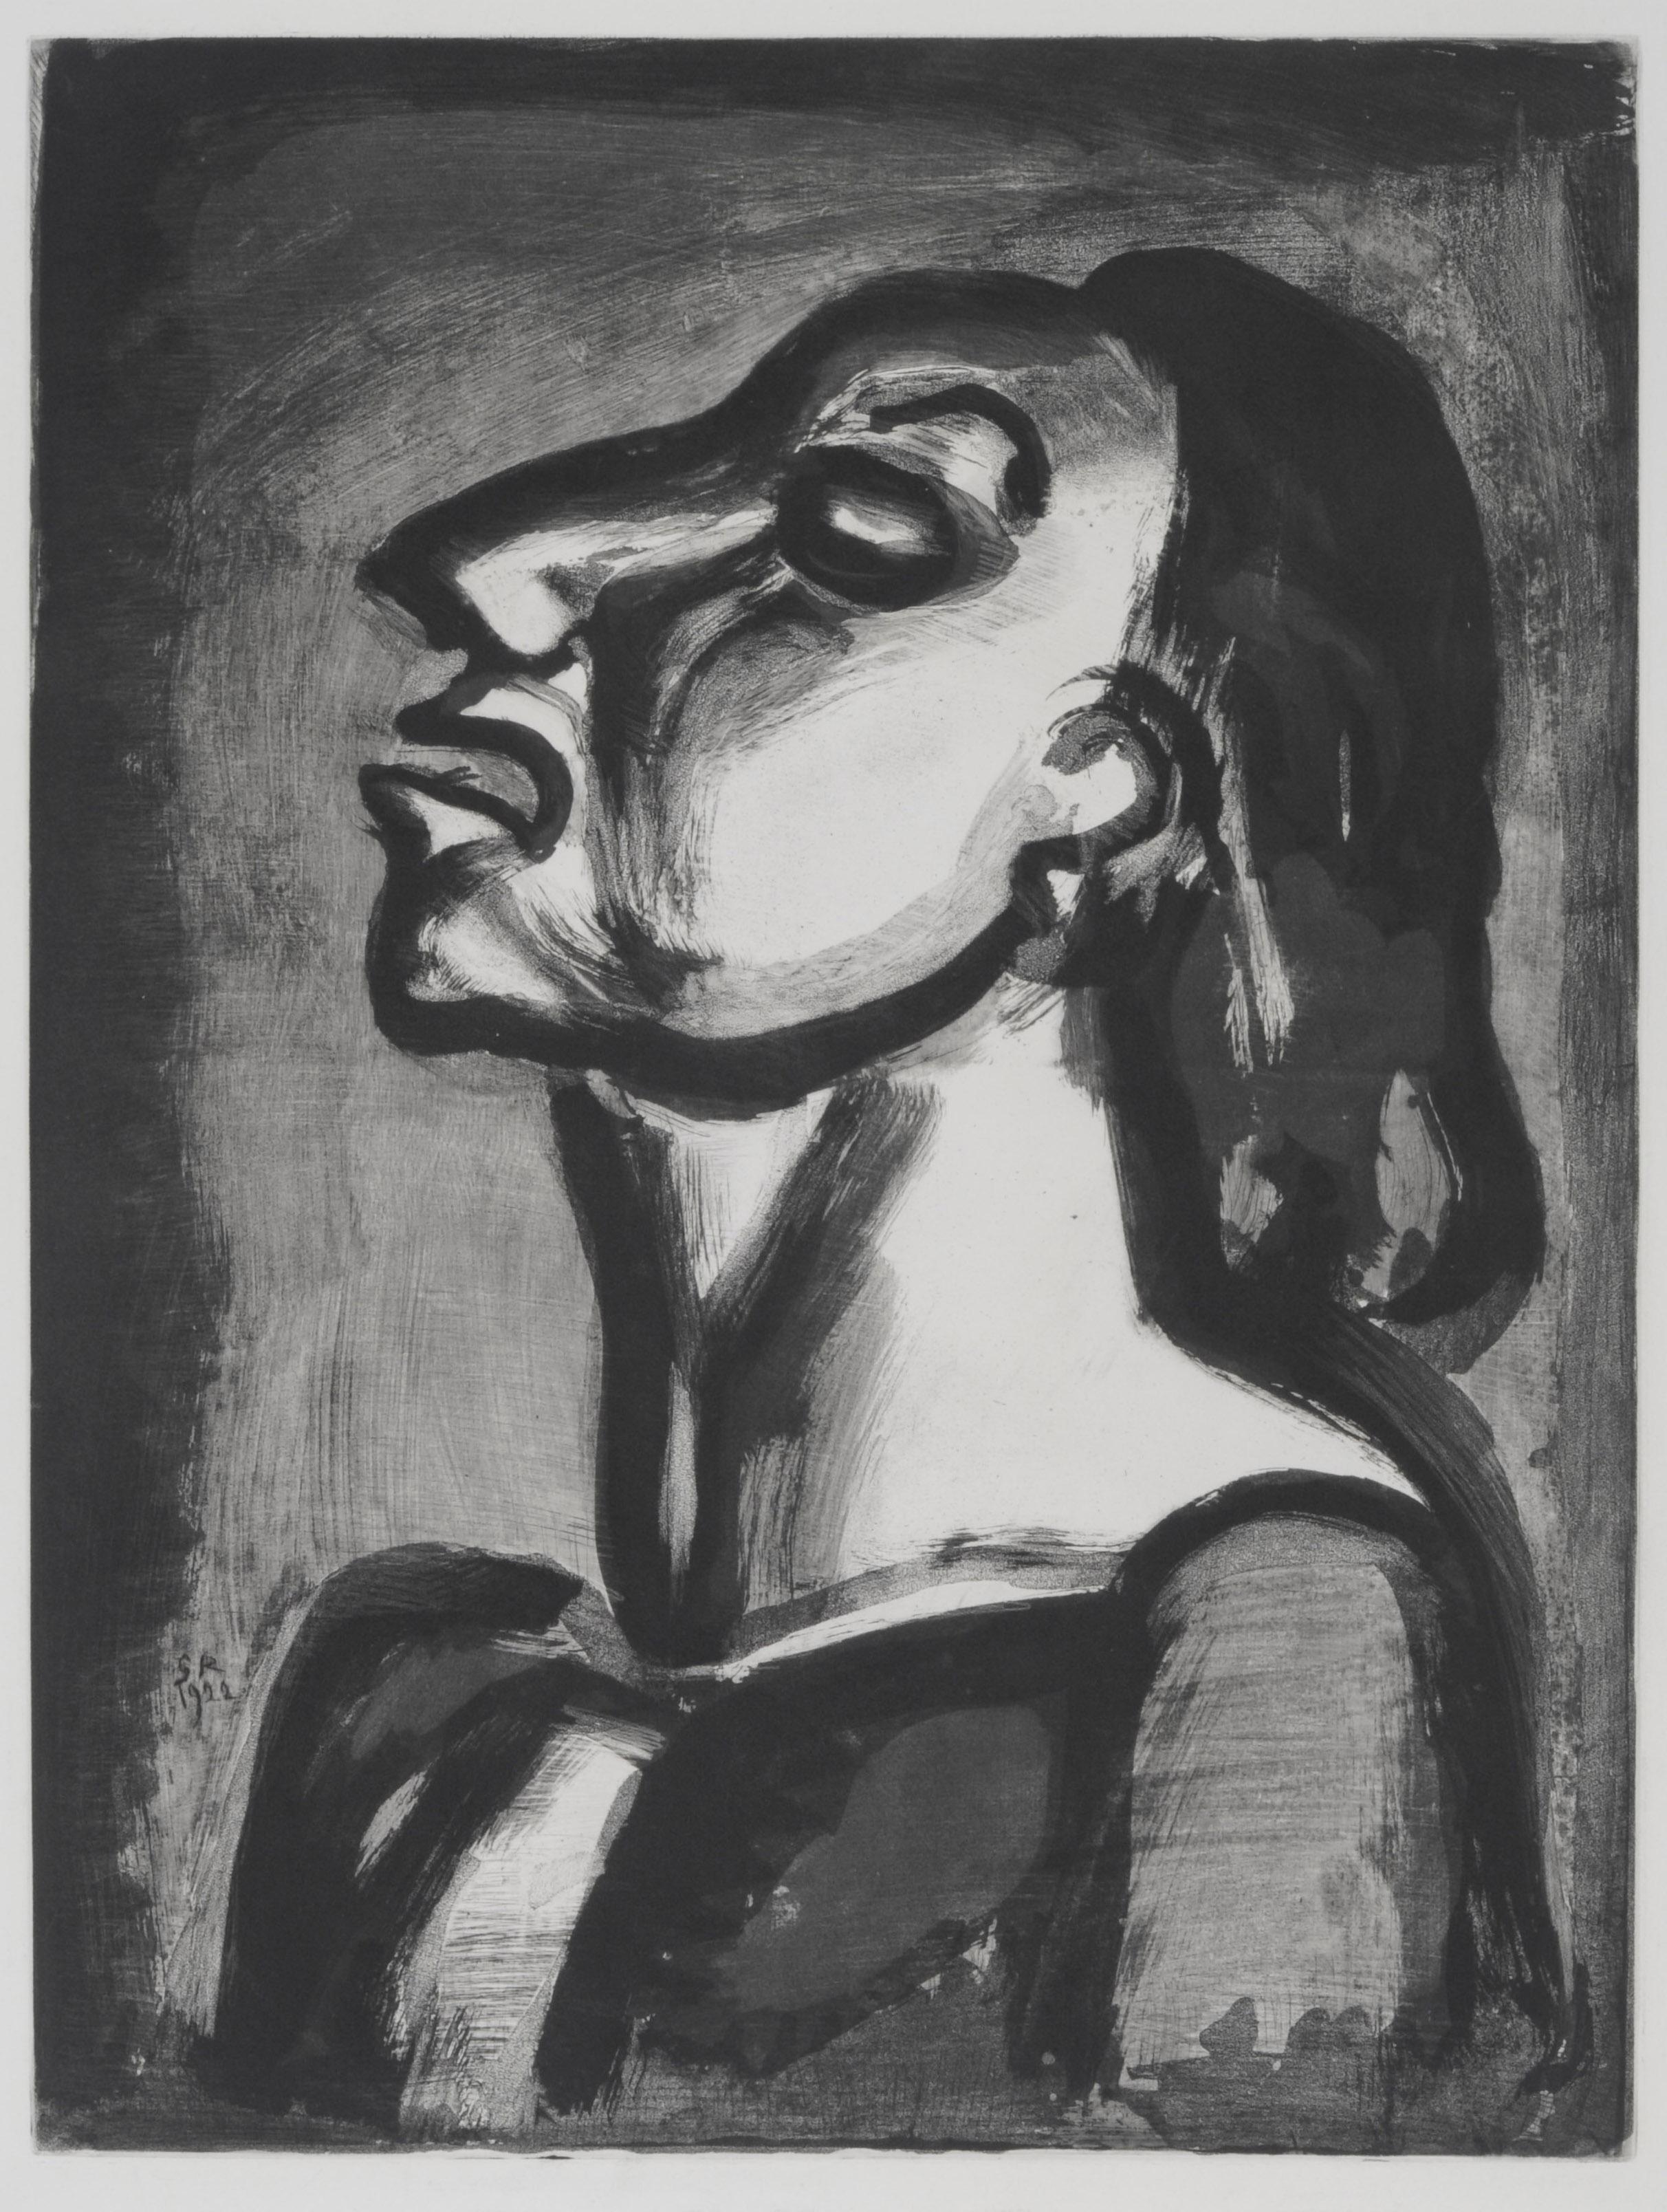 Georges Rouault Figurative Print - Son avocat, en phrases creuses, clame sa totale inconscience (His lawyer, ...